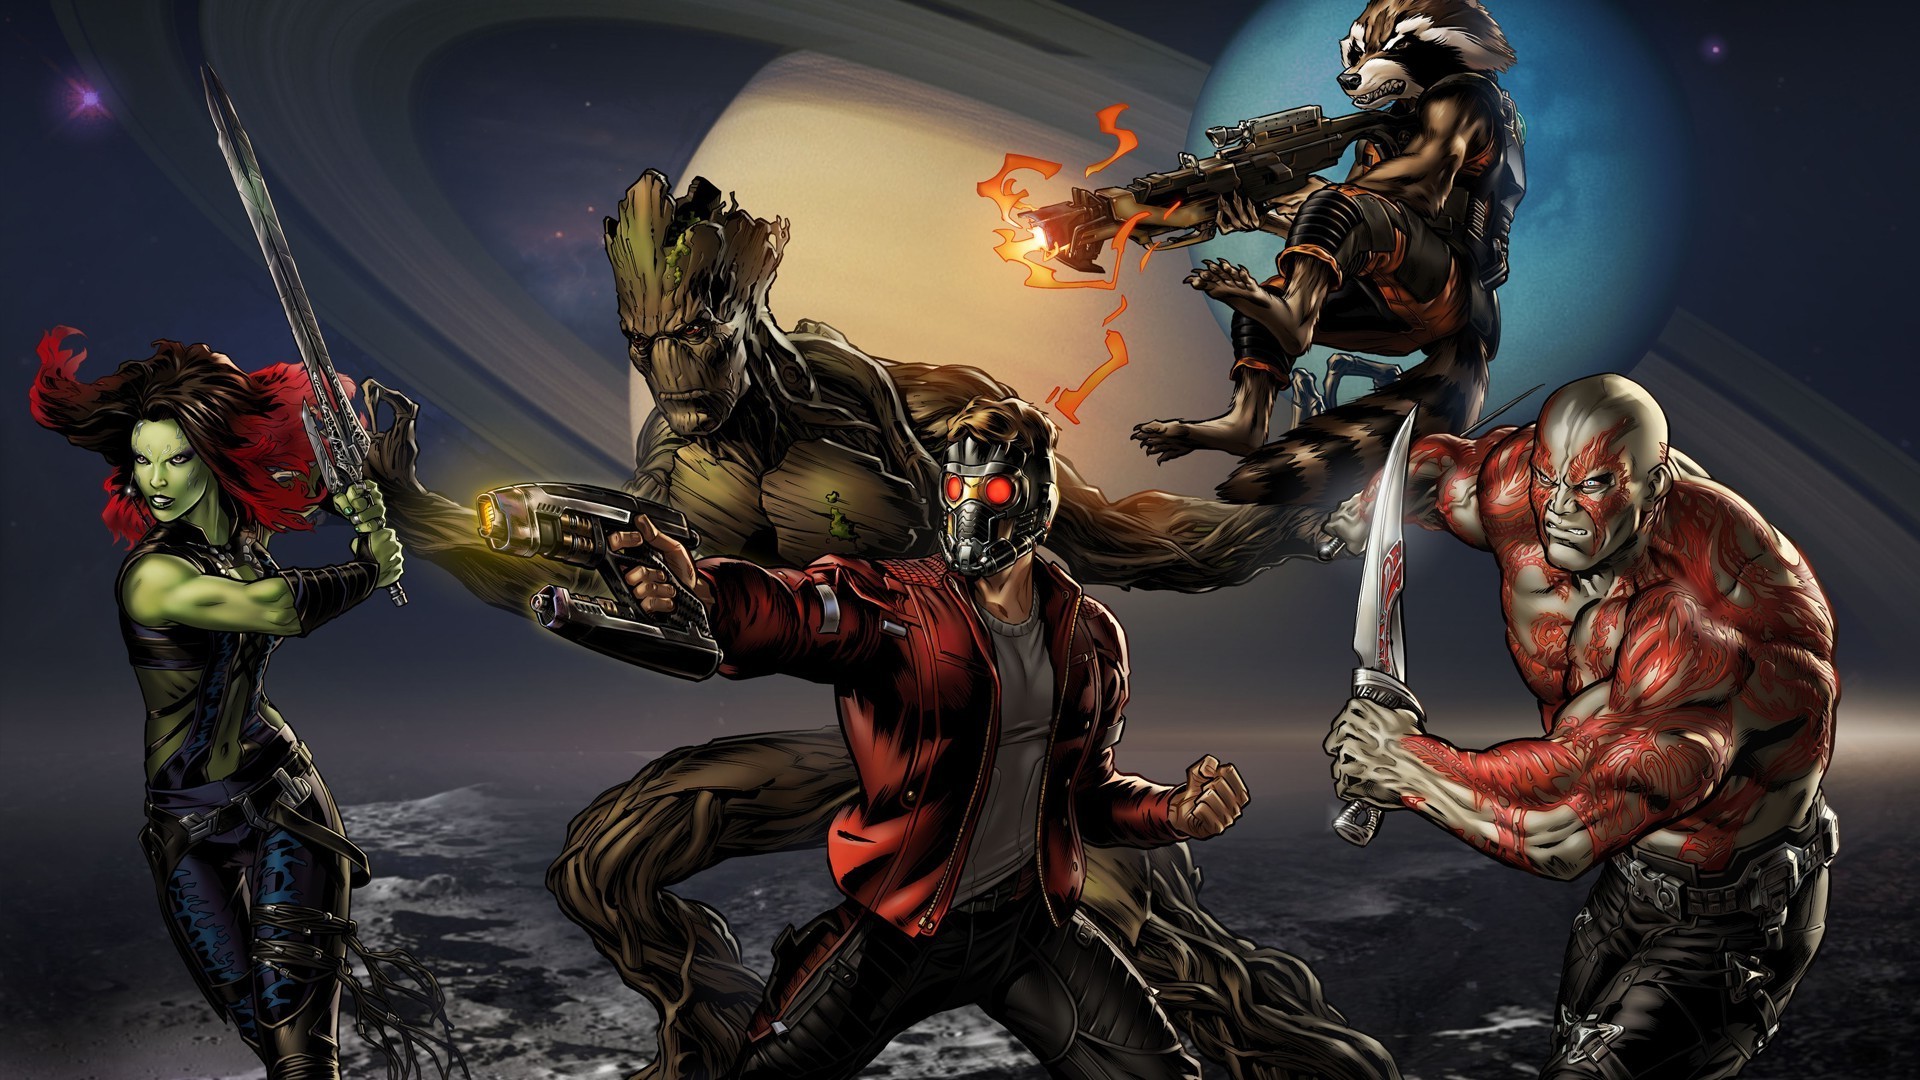 Guardians Of The Galaxy, Star Lord, Gamora, Rocket Raccoon, Groot, Drax The Destroyer Wallpaper HD / Desktop and Mobile Background